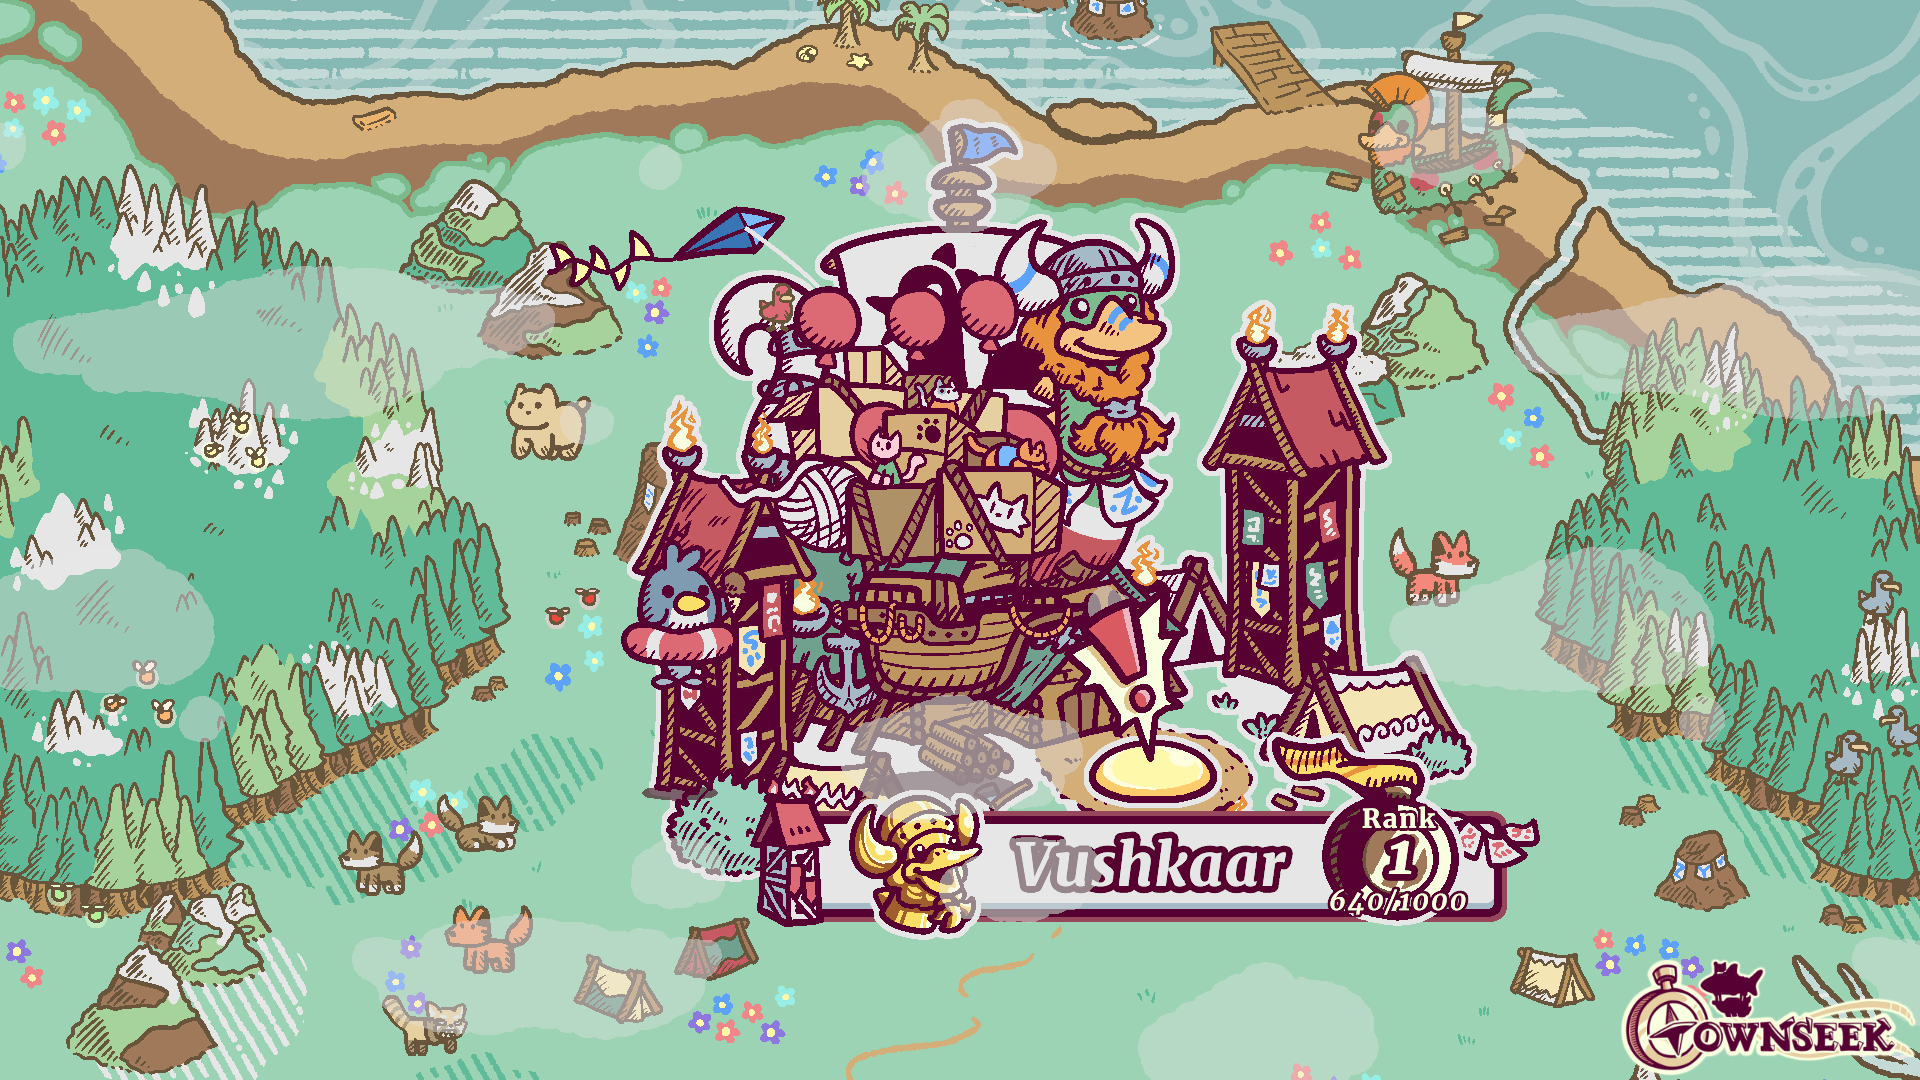 A screenshot of Townseek showing the new nomadic town of Vushkaar. The town appears to be a wood settlement with a duck-shapped decoration. Announced during Wholesome Direct.